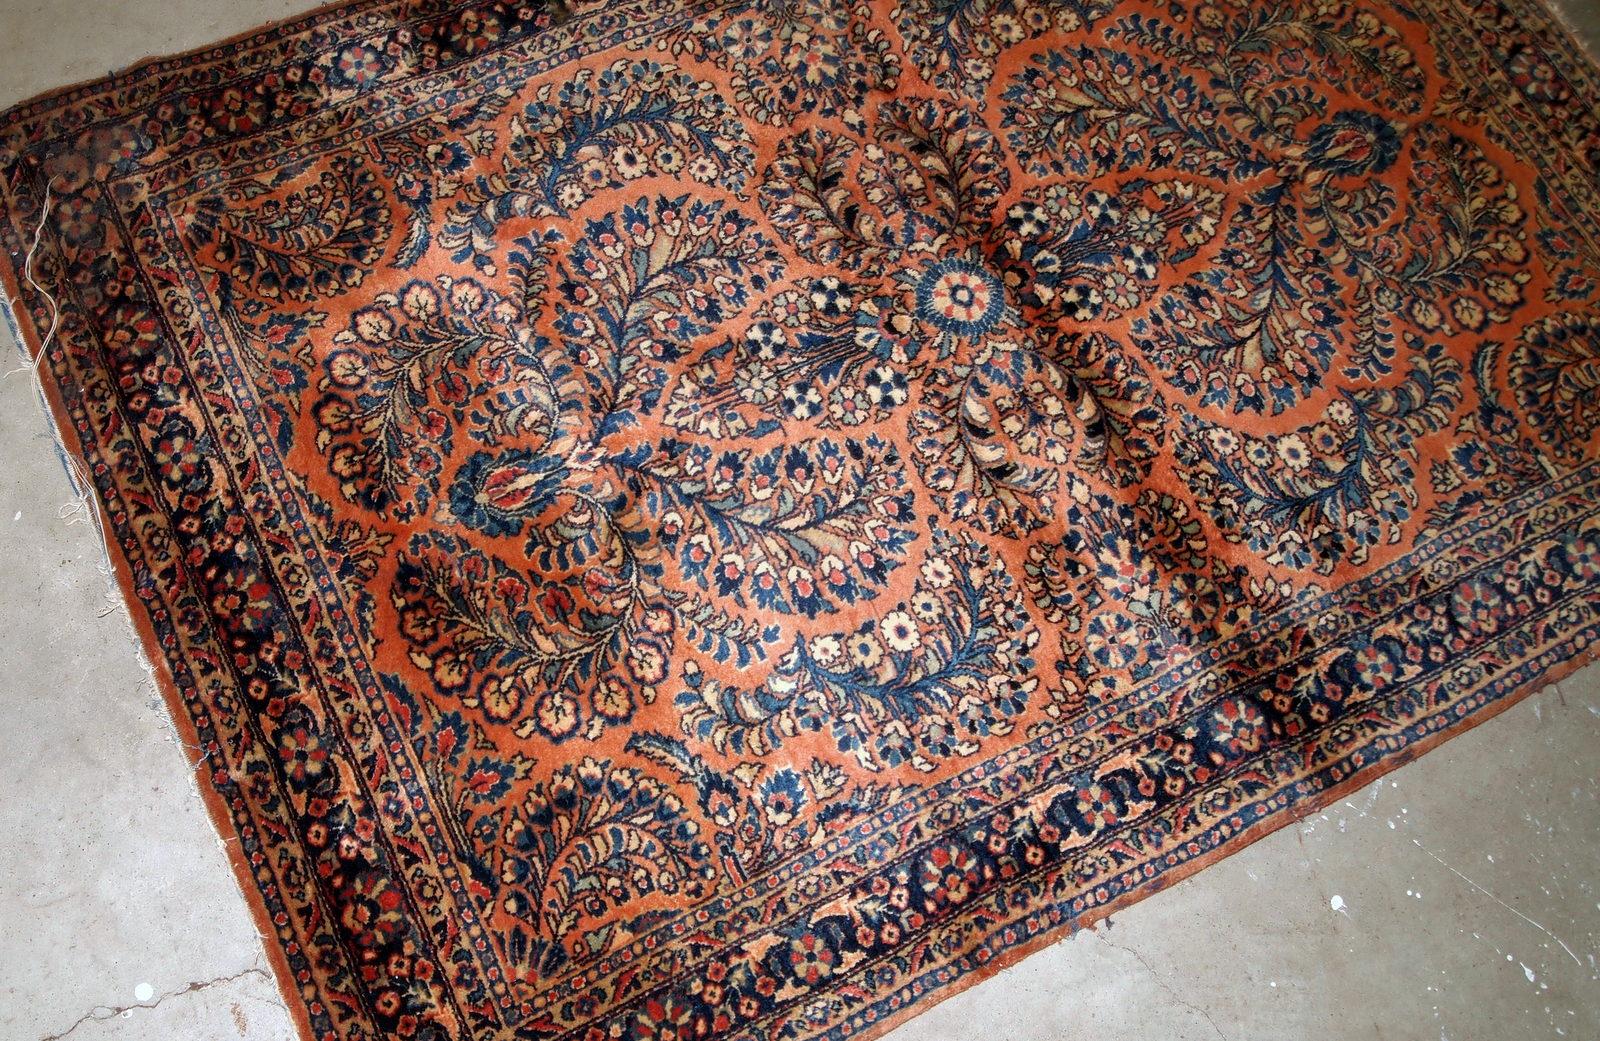 Handmade antique Sarouk style rug in original condition, it as some age wear on one corner. The rug is from the beginning of 20th century made in traditional floral design.

- Condition: Original, some age wear on one corner,

- circa